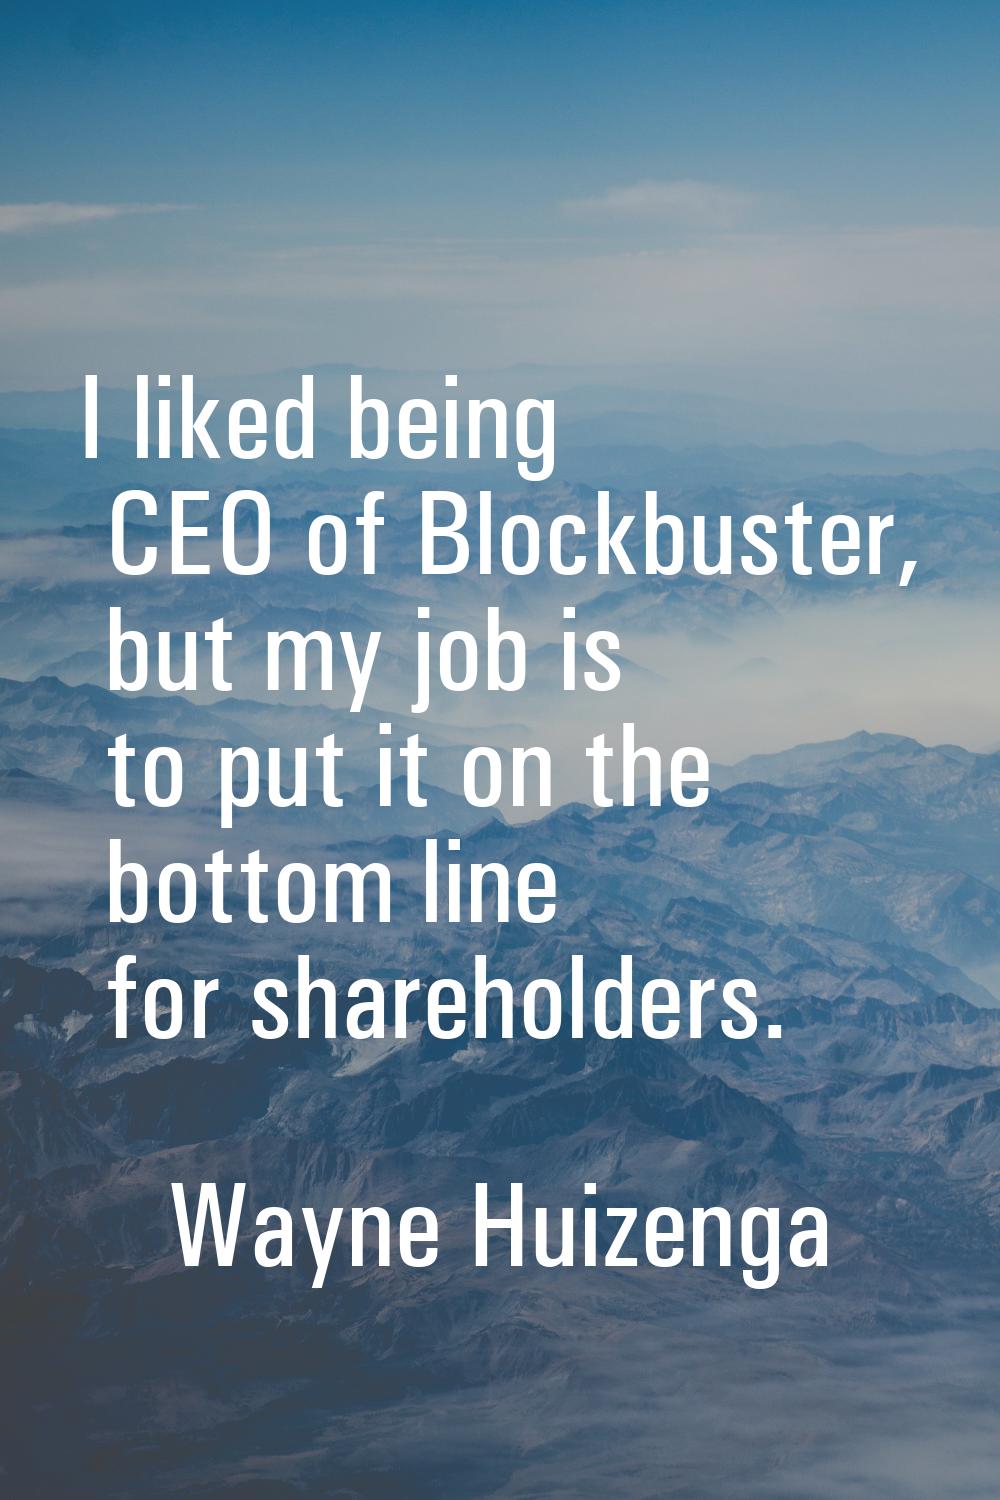 I liked being CEO of Blockbuster, but my job is to put it on the bottom line for shareholders.